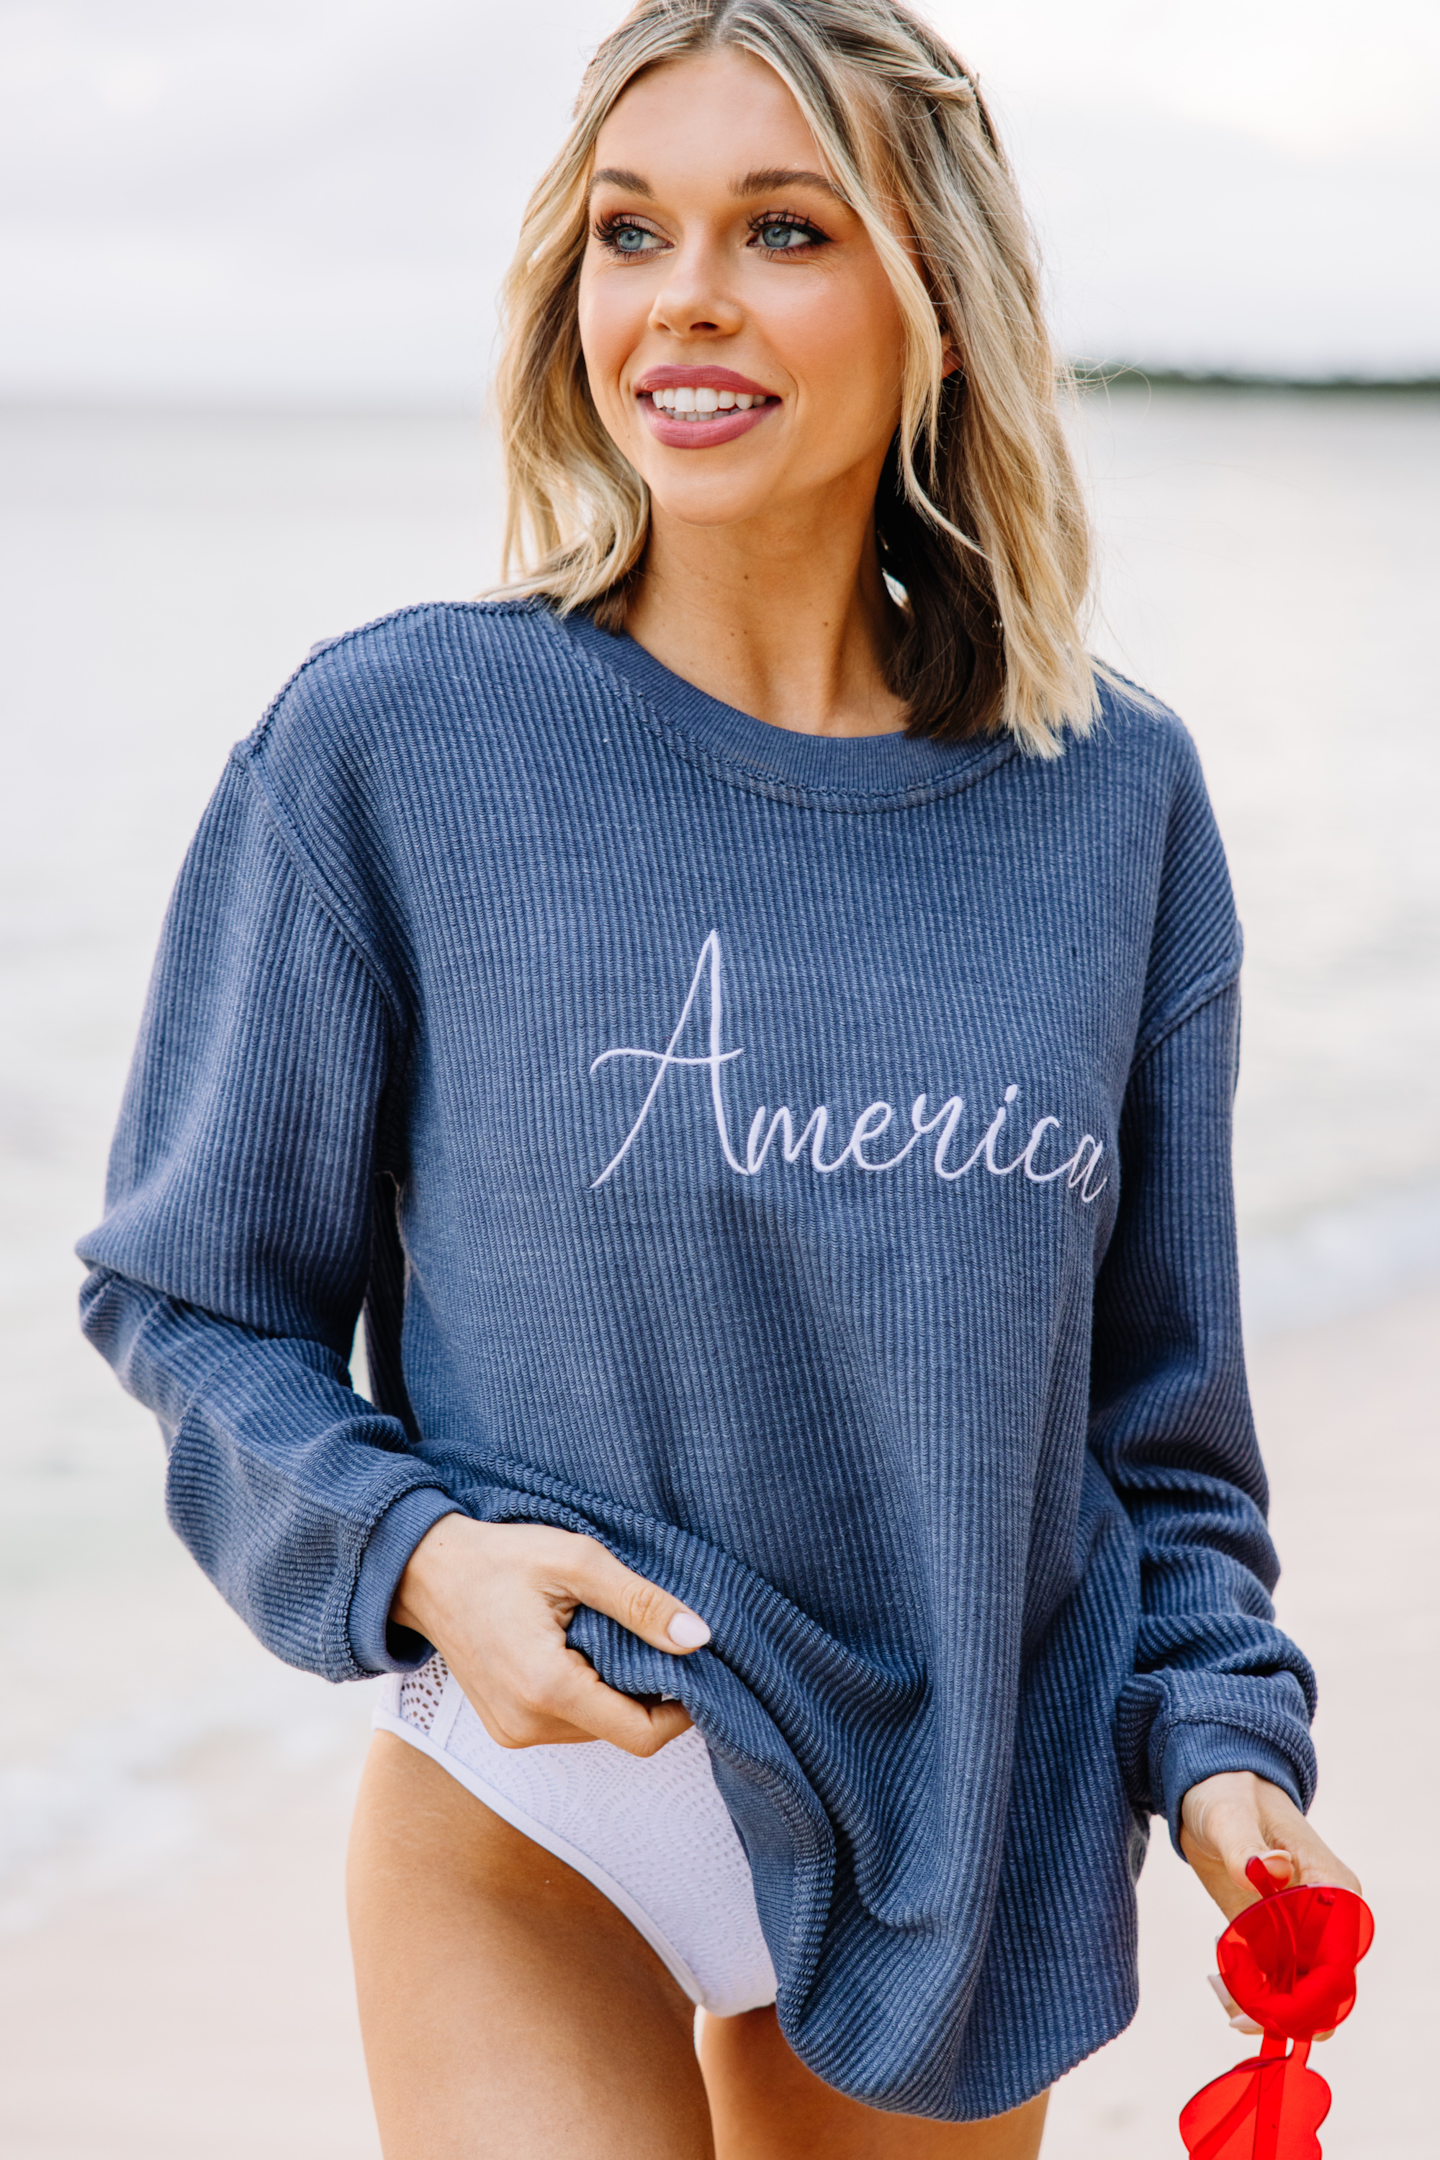 https://shopthemint.com/products/america-navy-blue-corded-embroidered-sweatshirt